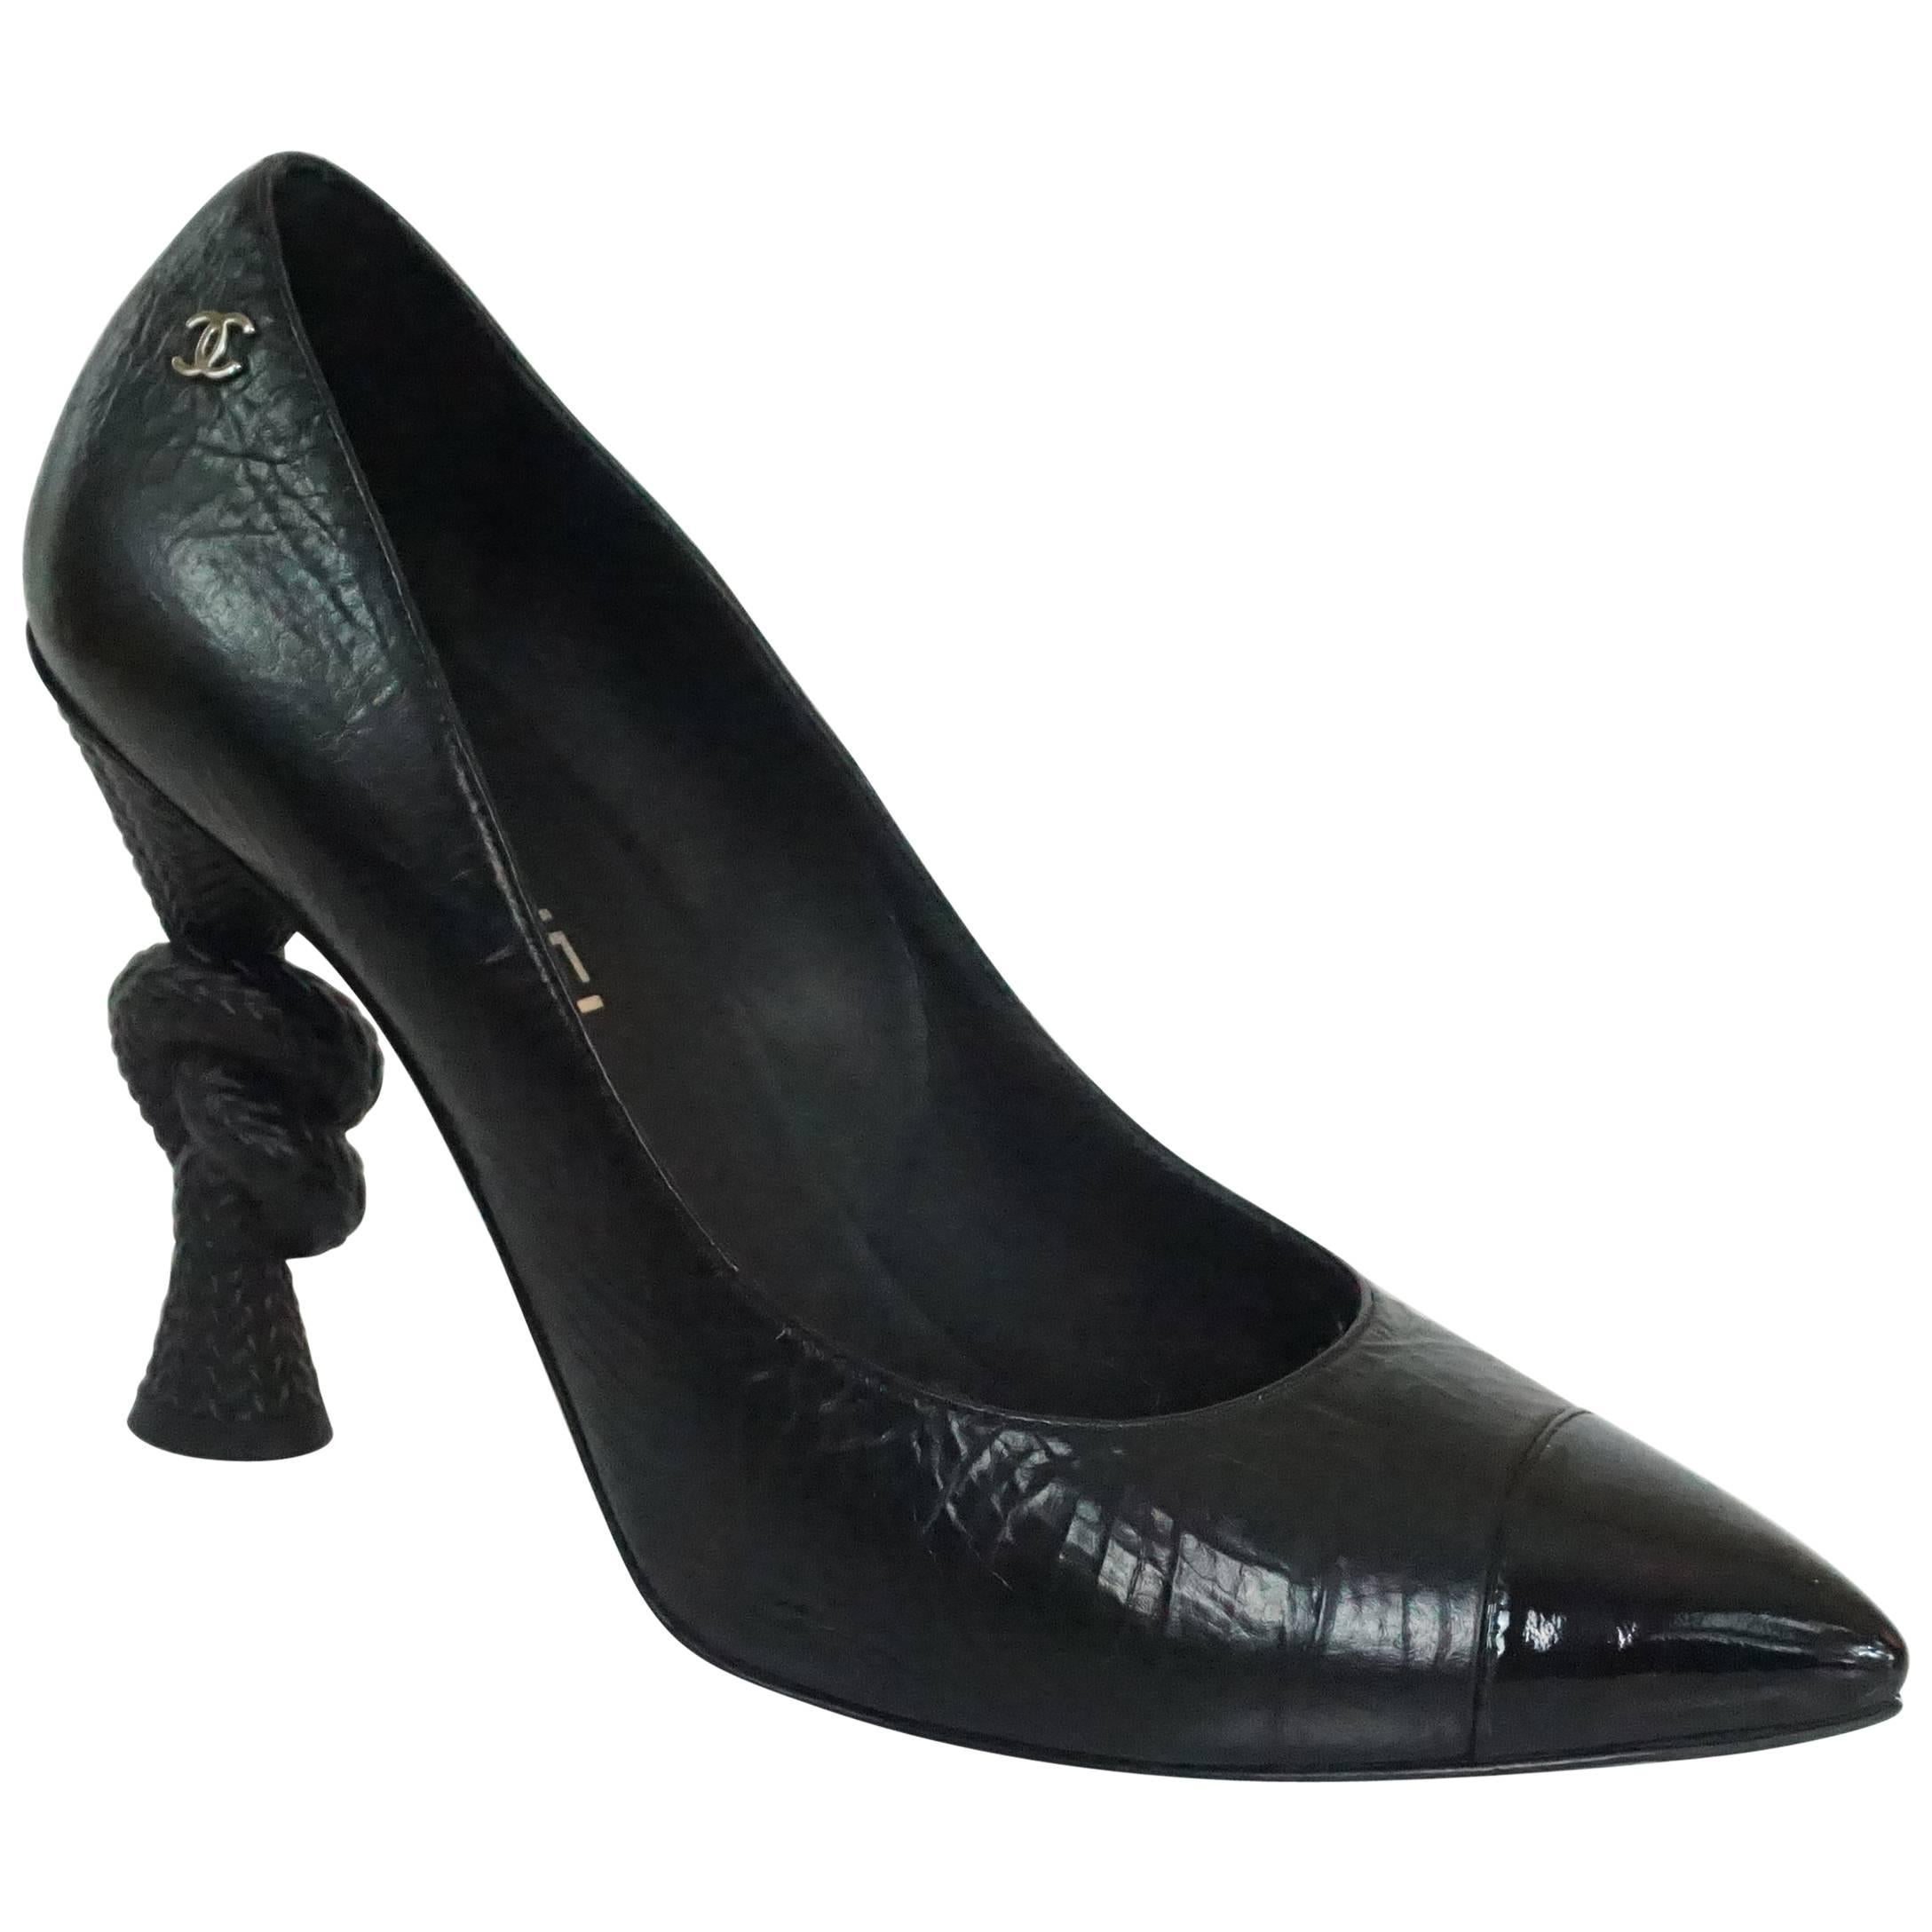 Chanel Black Leather and Patent Pump w/ Rope Knot Heel - 40.5